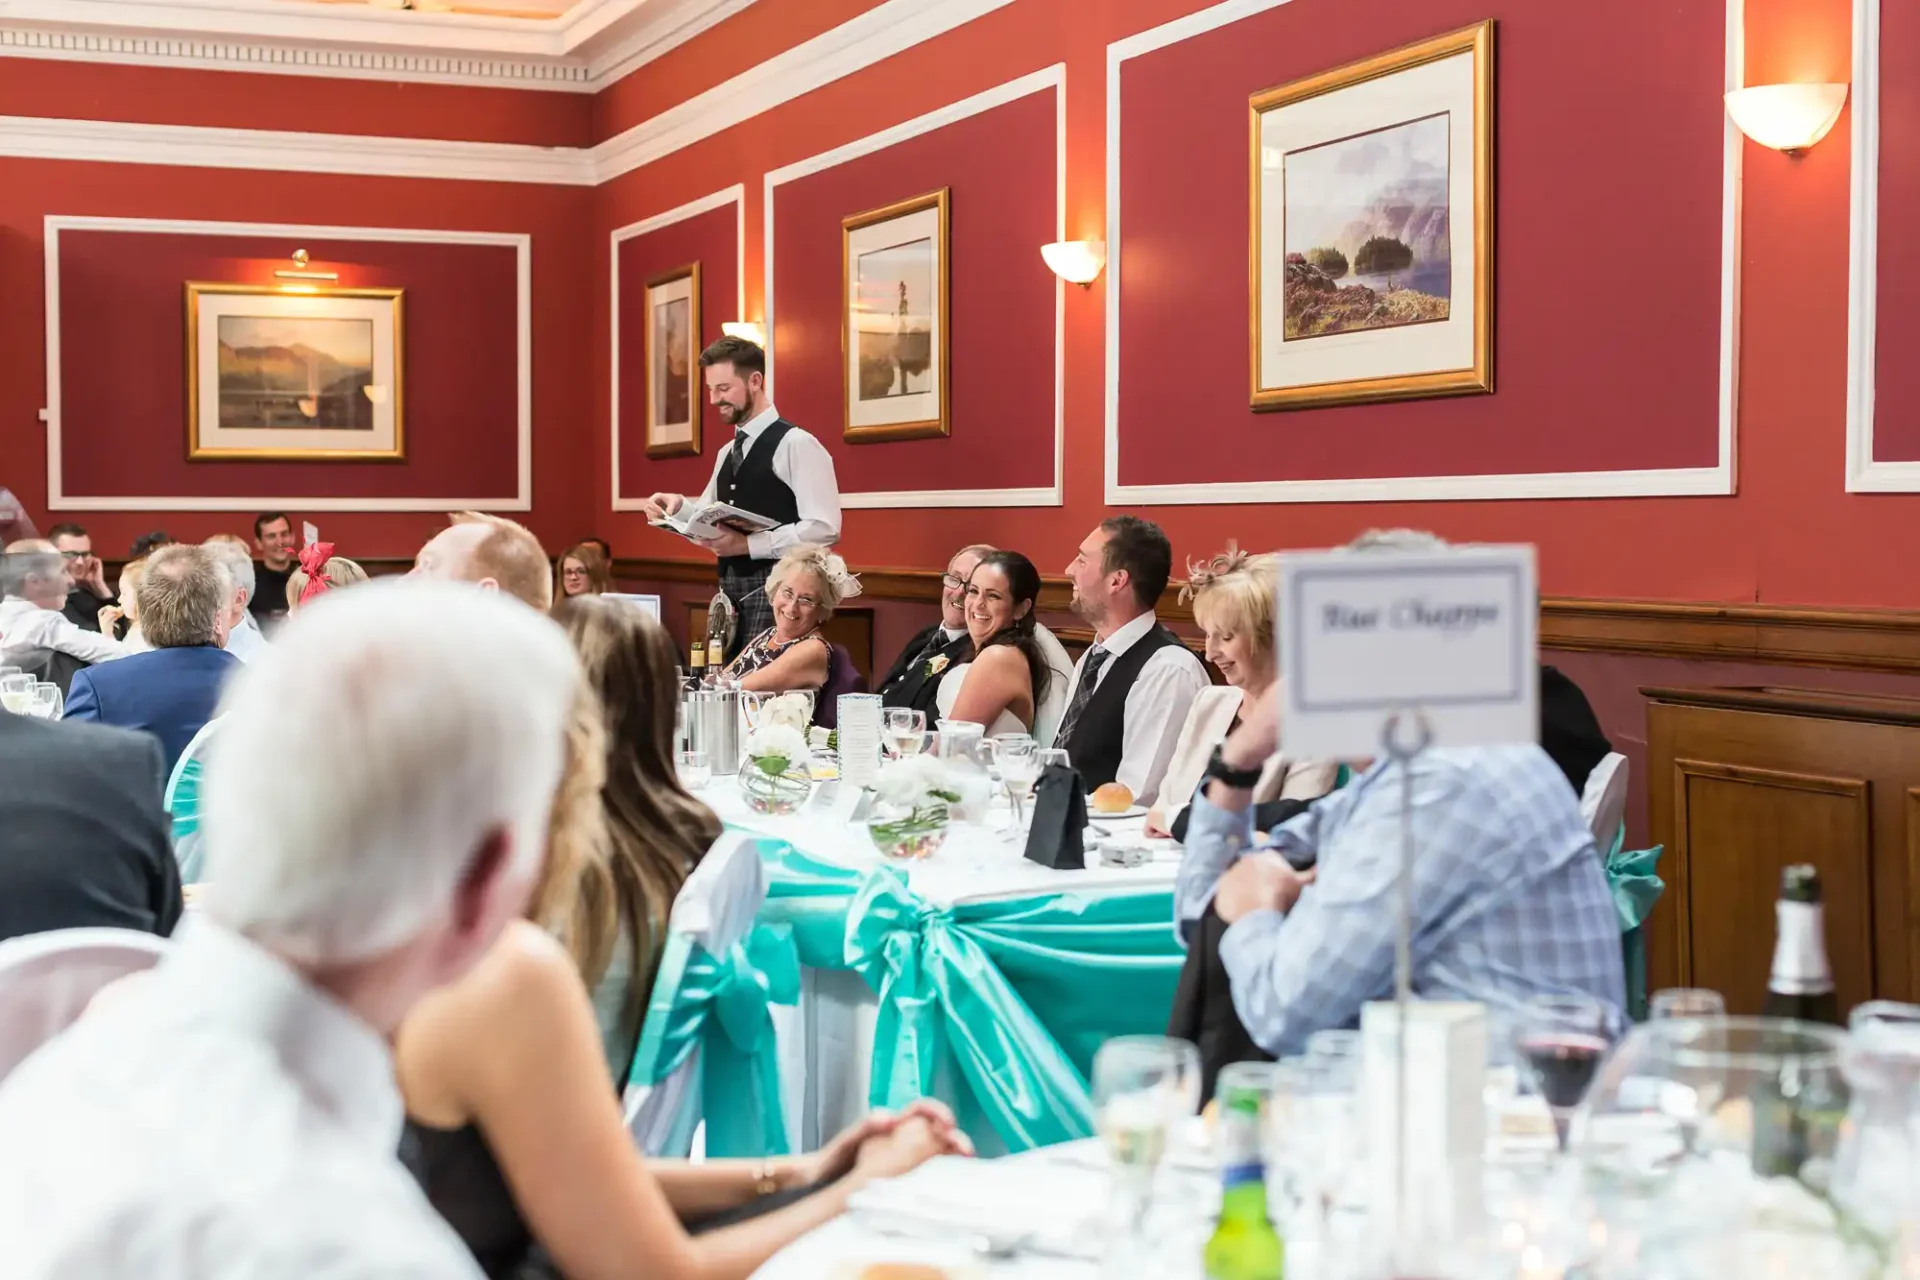 A waiter serves guests at a formal dining event in a room with red walls and framed artwork, decorated tables with teal accents visible.